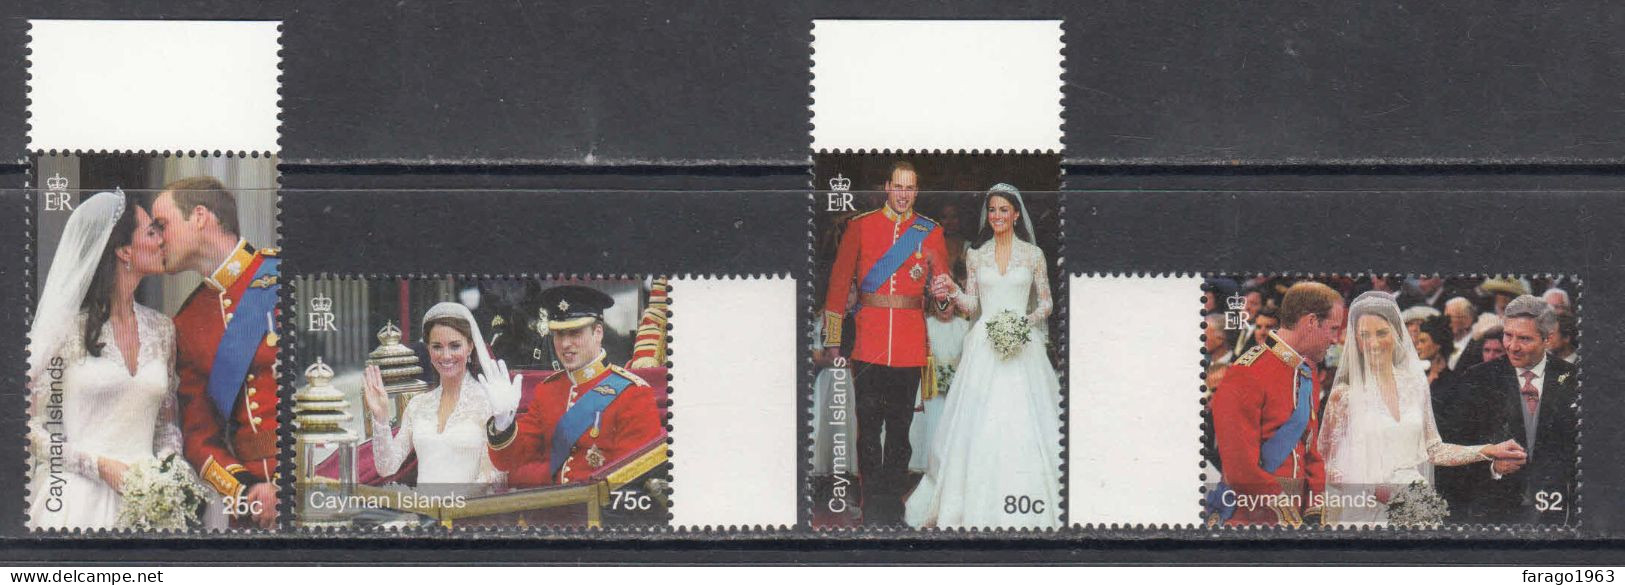 2011 Cayman Islands Royal Wedding William & Kate  Complete Set Of 4 MNH @ BELOW FACE VALUE - Caimán (Islas)